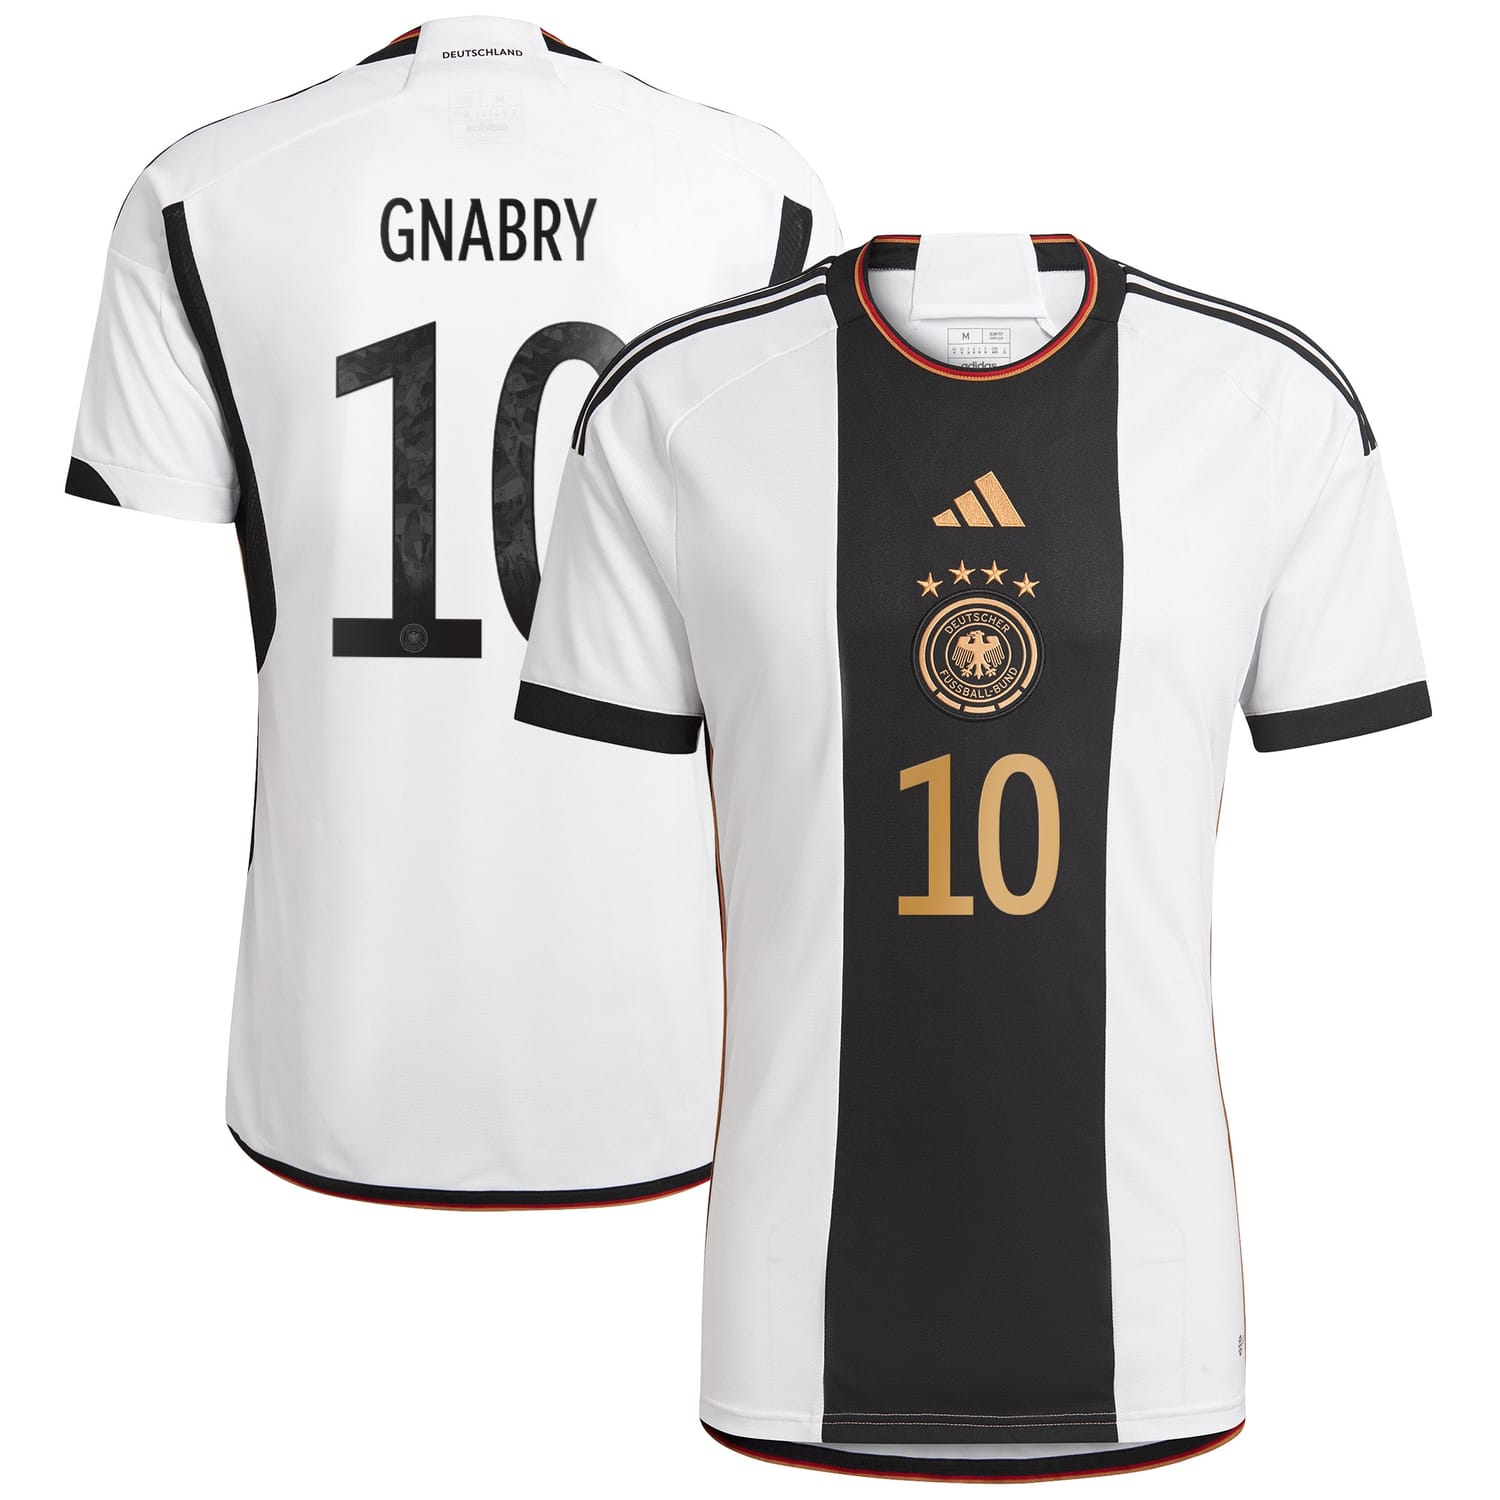 Germany National Team Home Jersey Shirt player Serge Gnabry 10 printing for Men